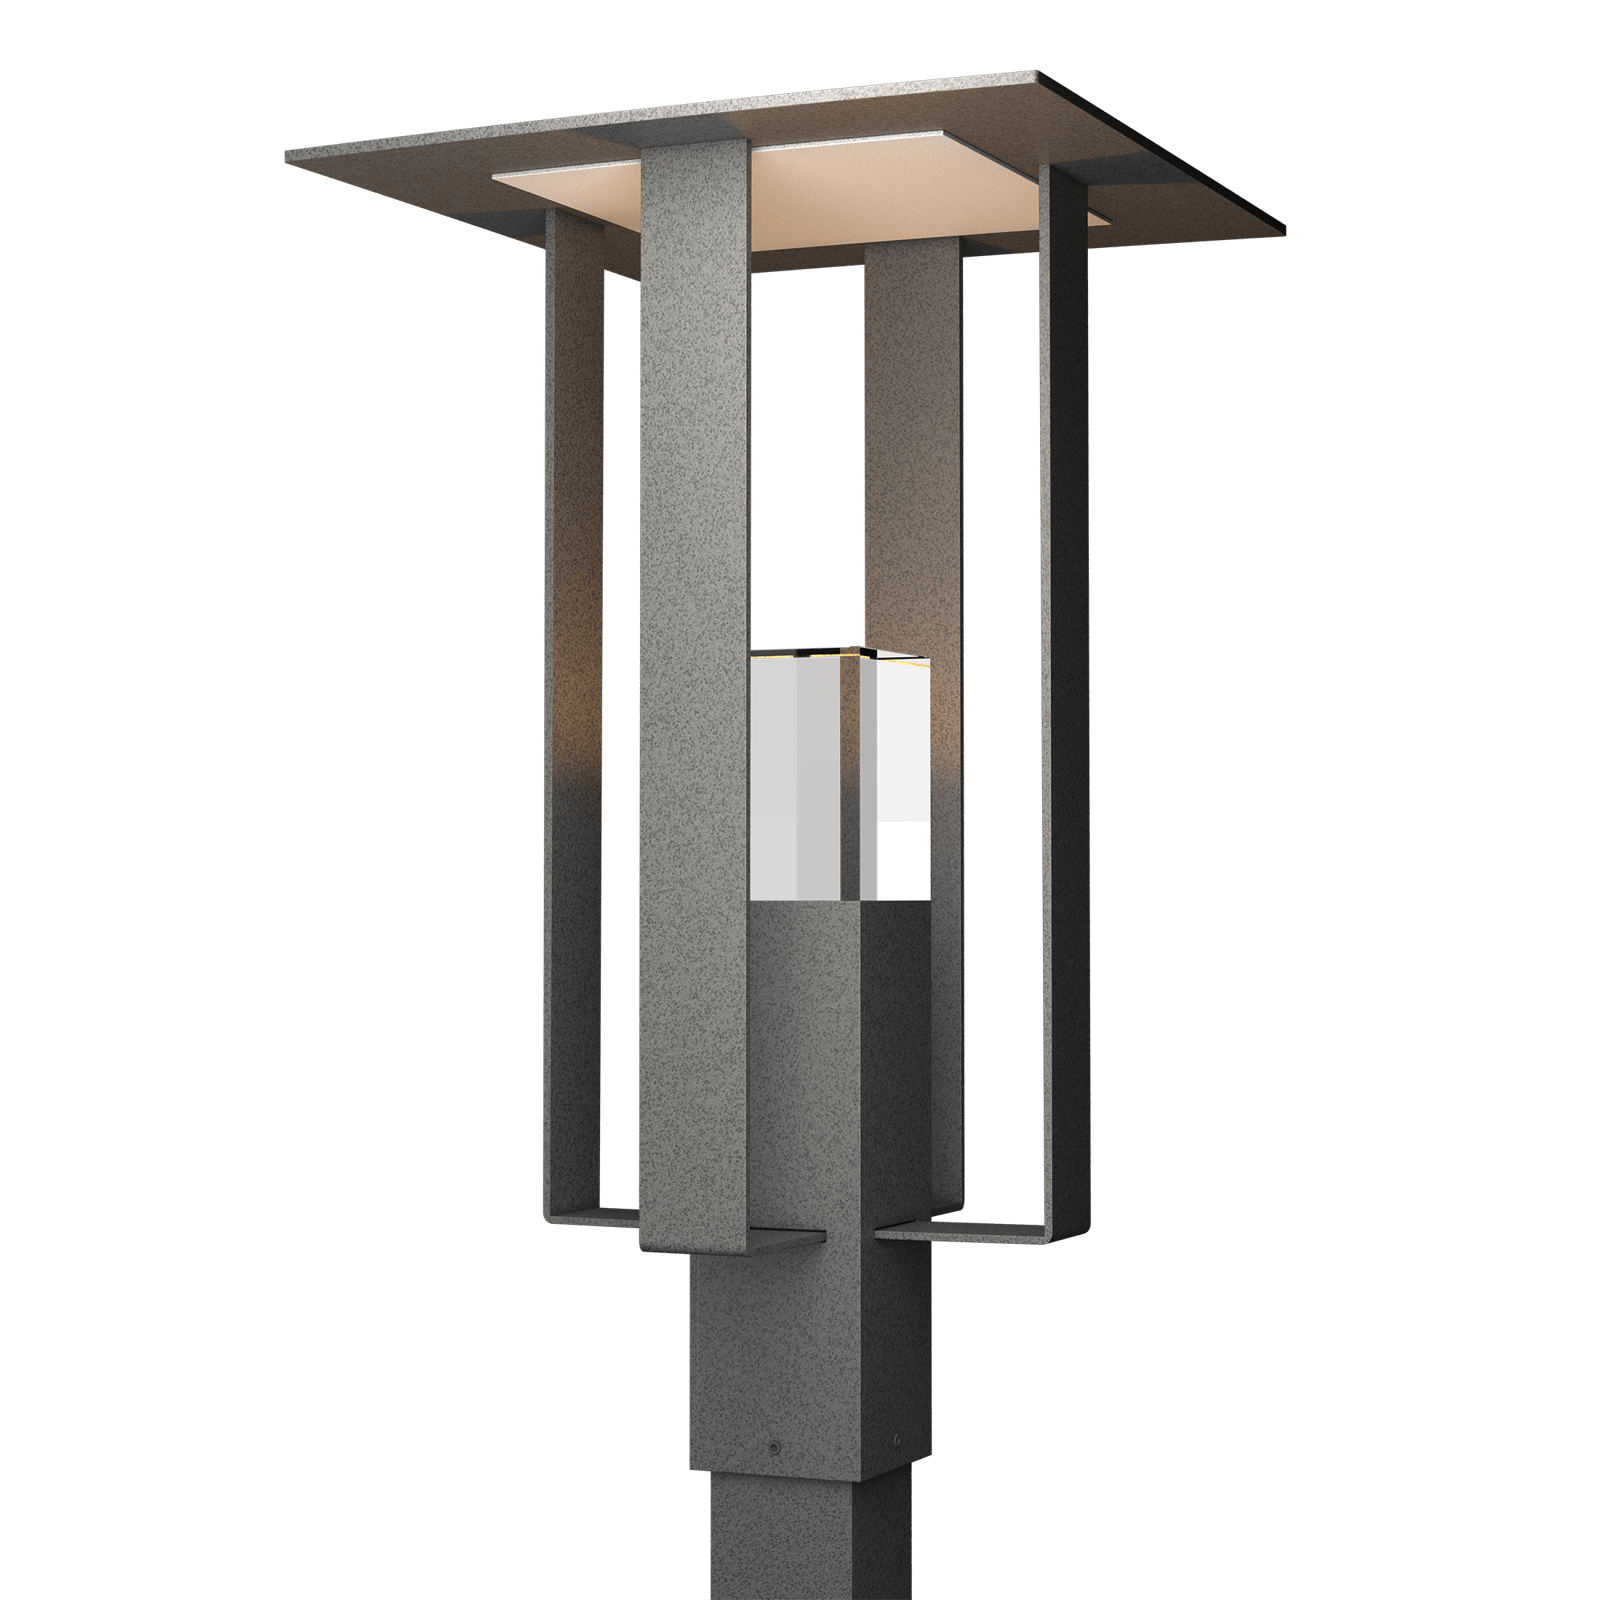 Hubbardton Forge Shadow Box Outdoor Post Light Outdoor l Post/Pier Mounts Hubbardton Forge Coastal Natural Iron Clear Glass (ZM) Coastal Silver